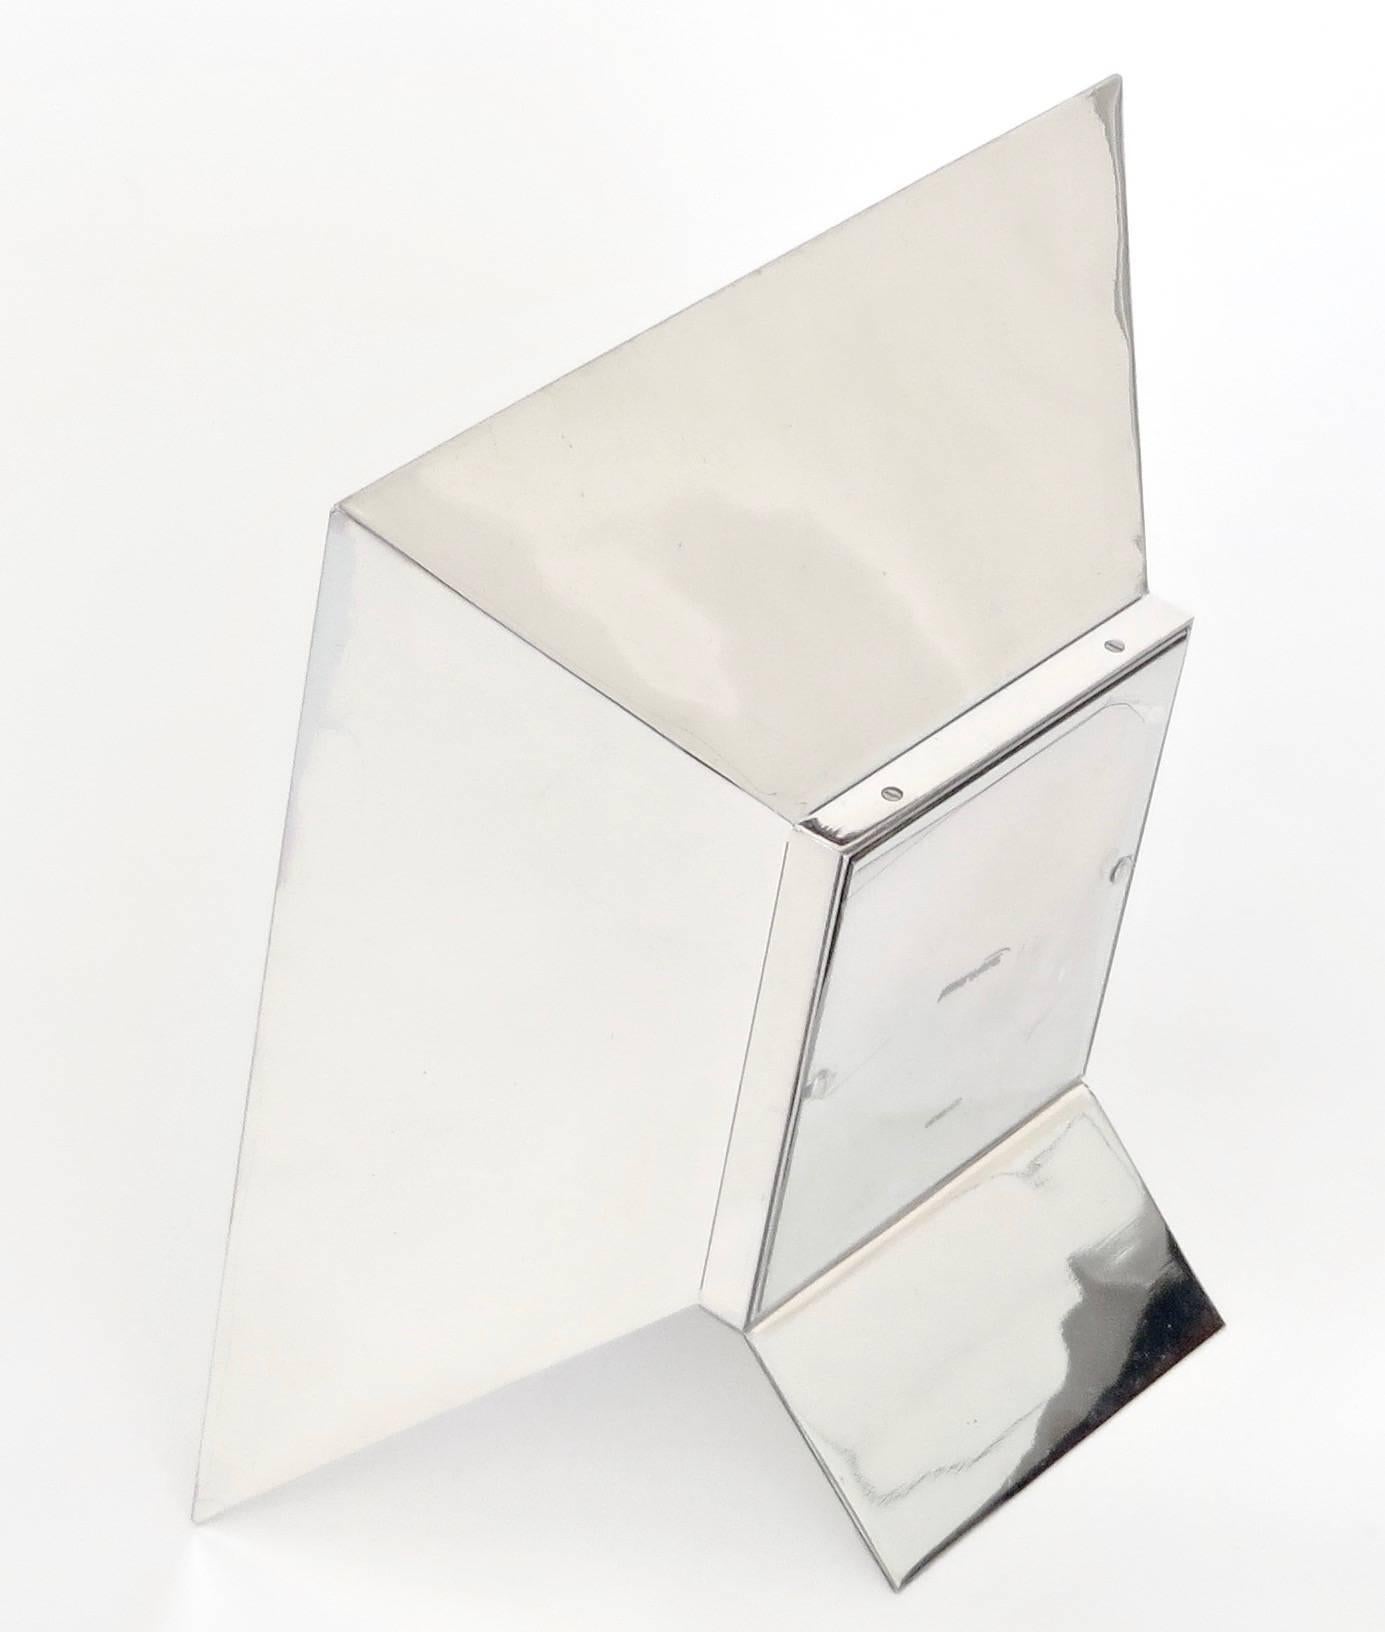 Glass Italian Silver Plate Picture Frame by Ettore Sottsass Editioned by Morellato